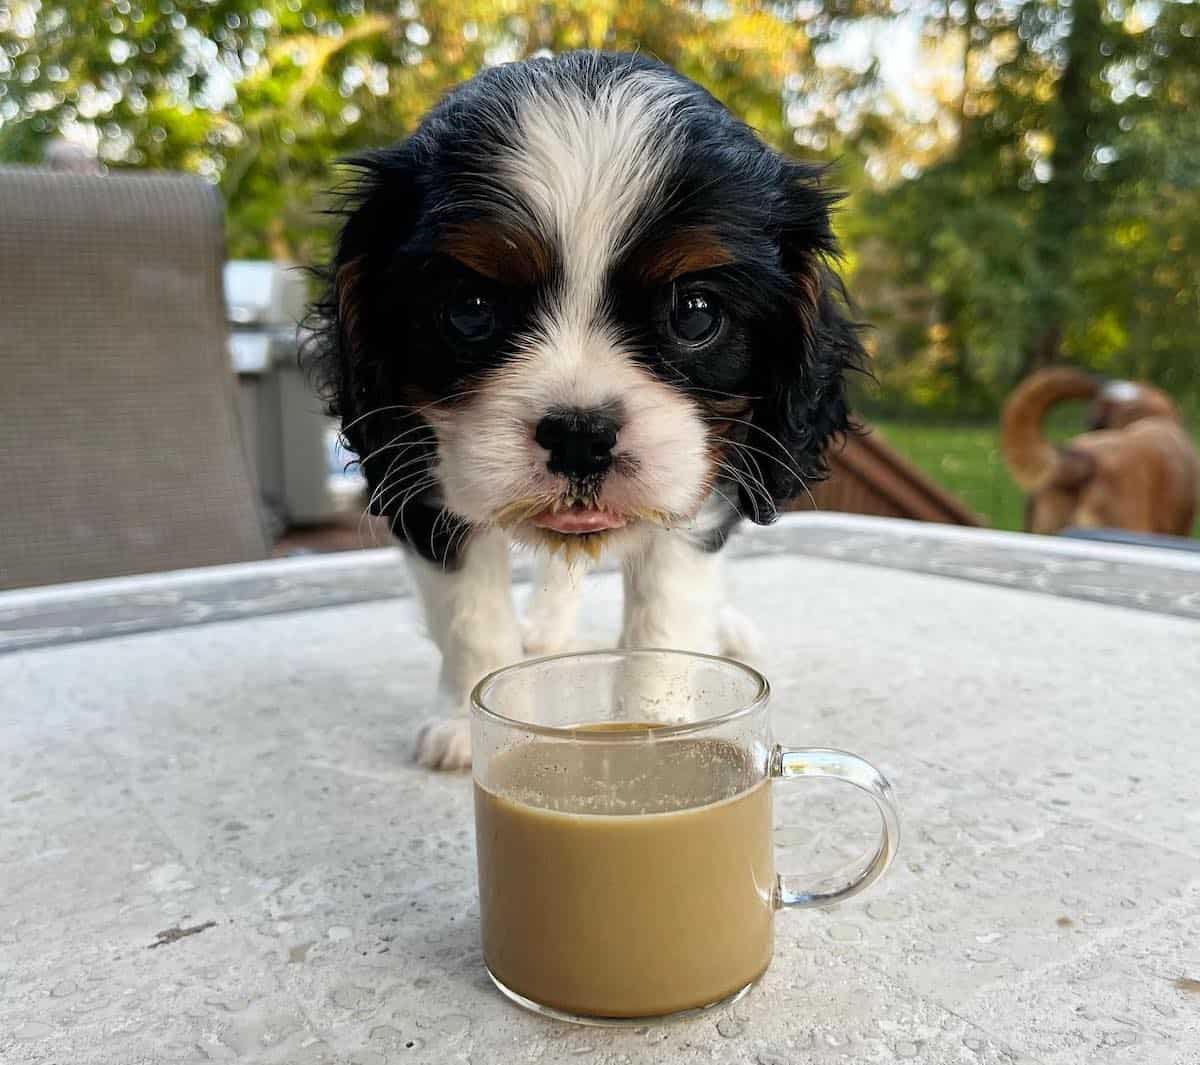 Small dog sipping from a cup of coffee